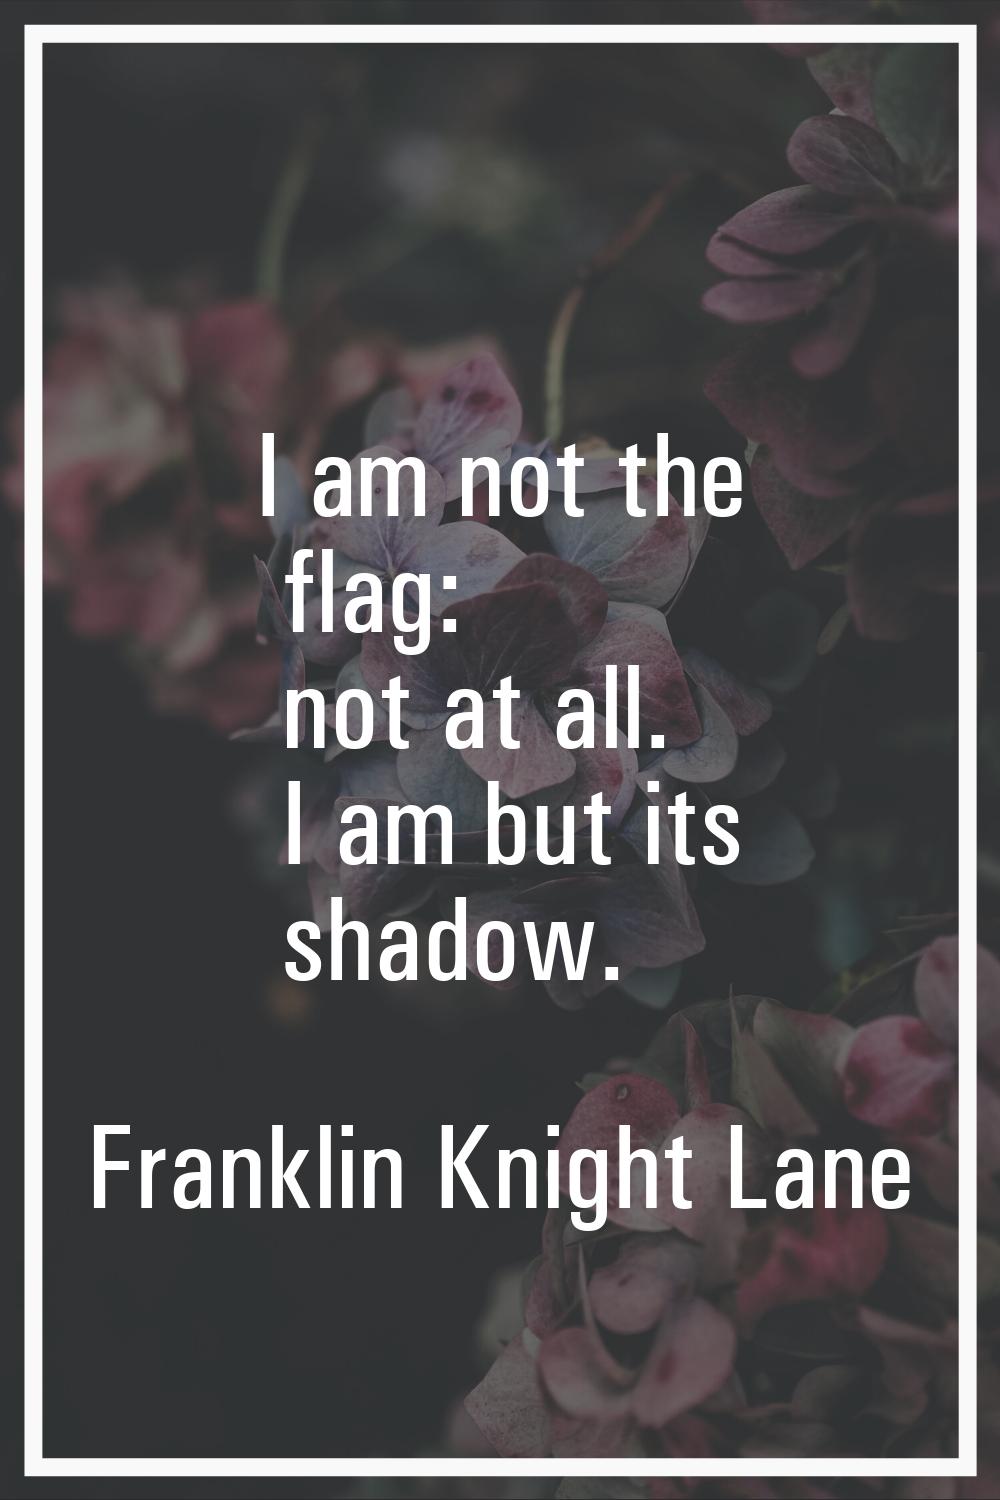 I am not the flag: not at all. I am but its shadow.